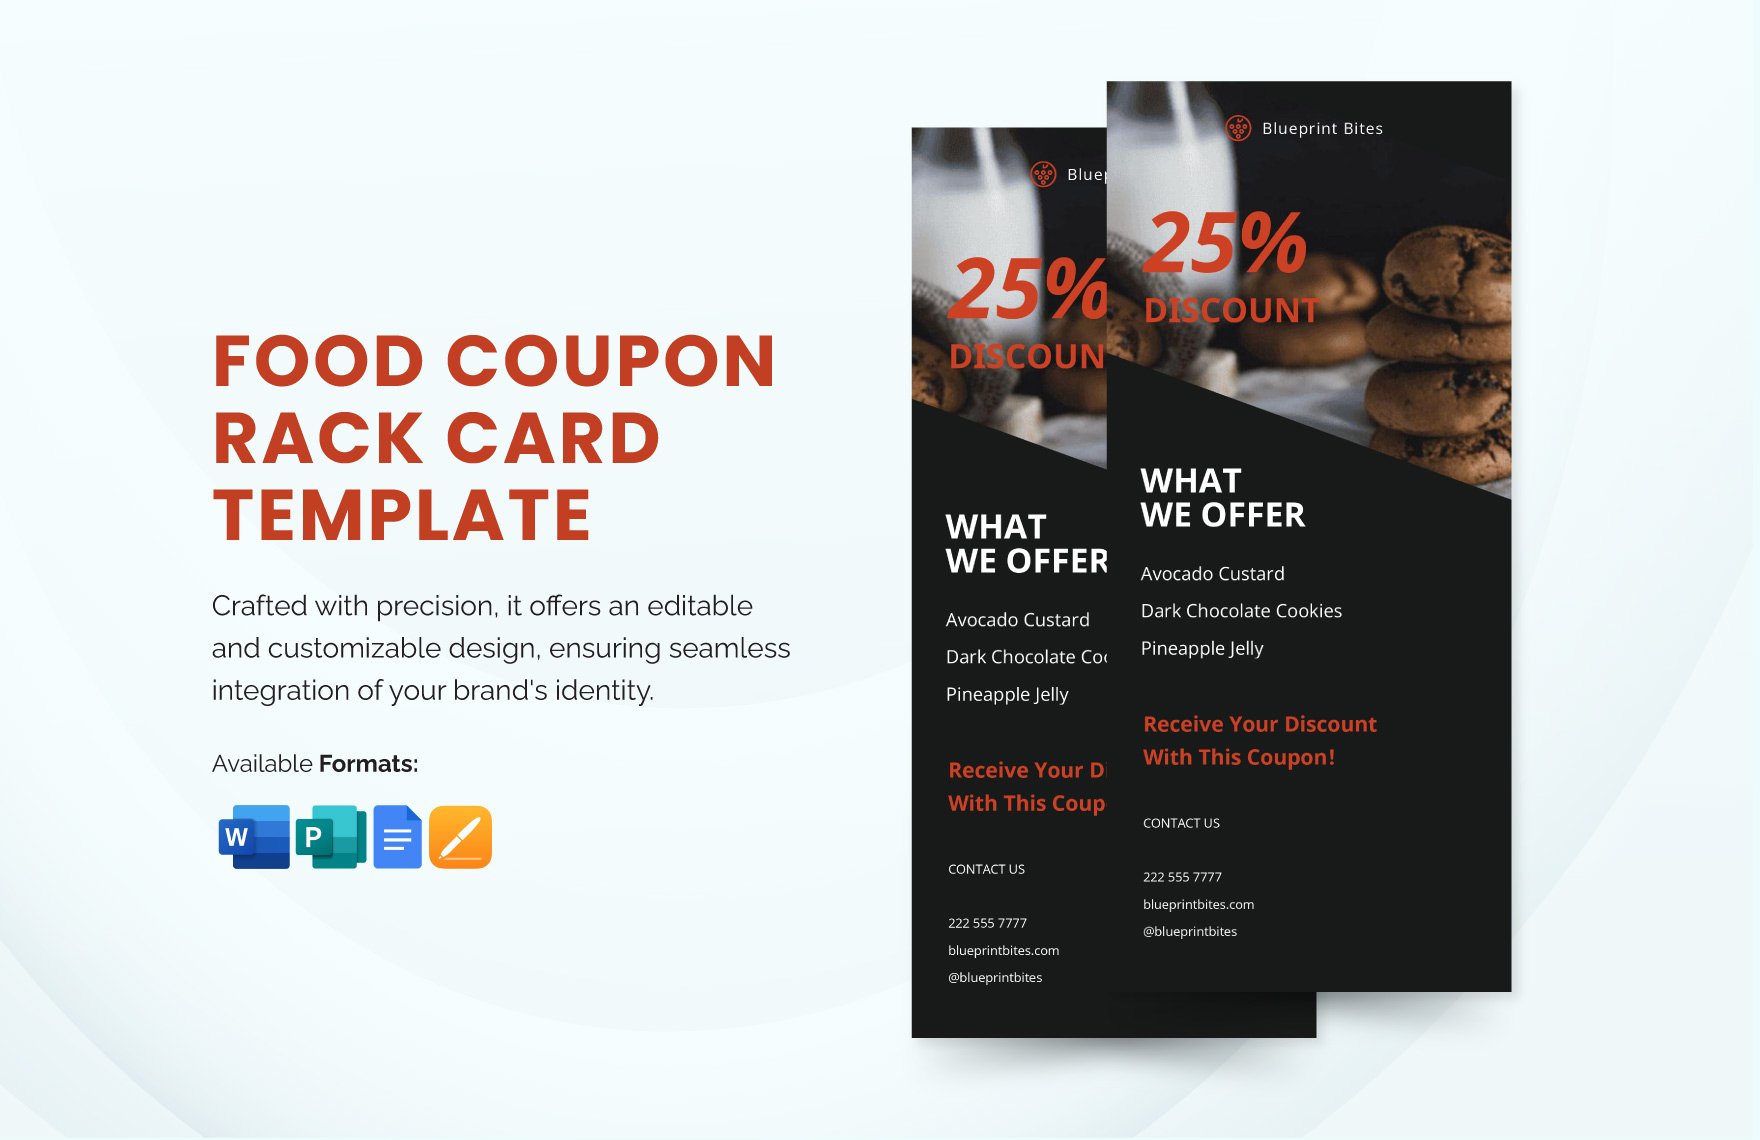 Food Coupon Rack Card Template in Word, Google Docs, Apple Pages, Publisher